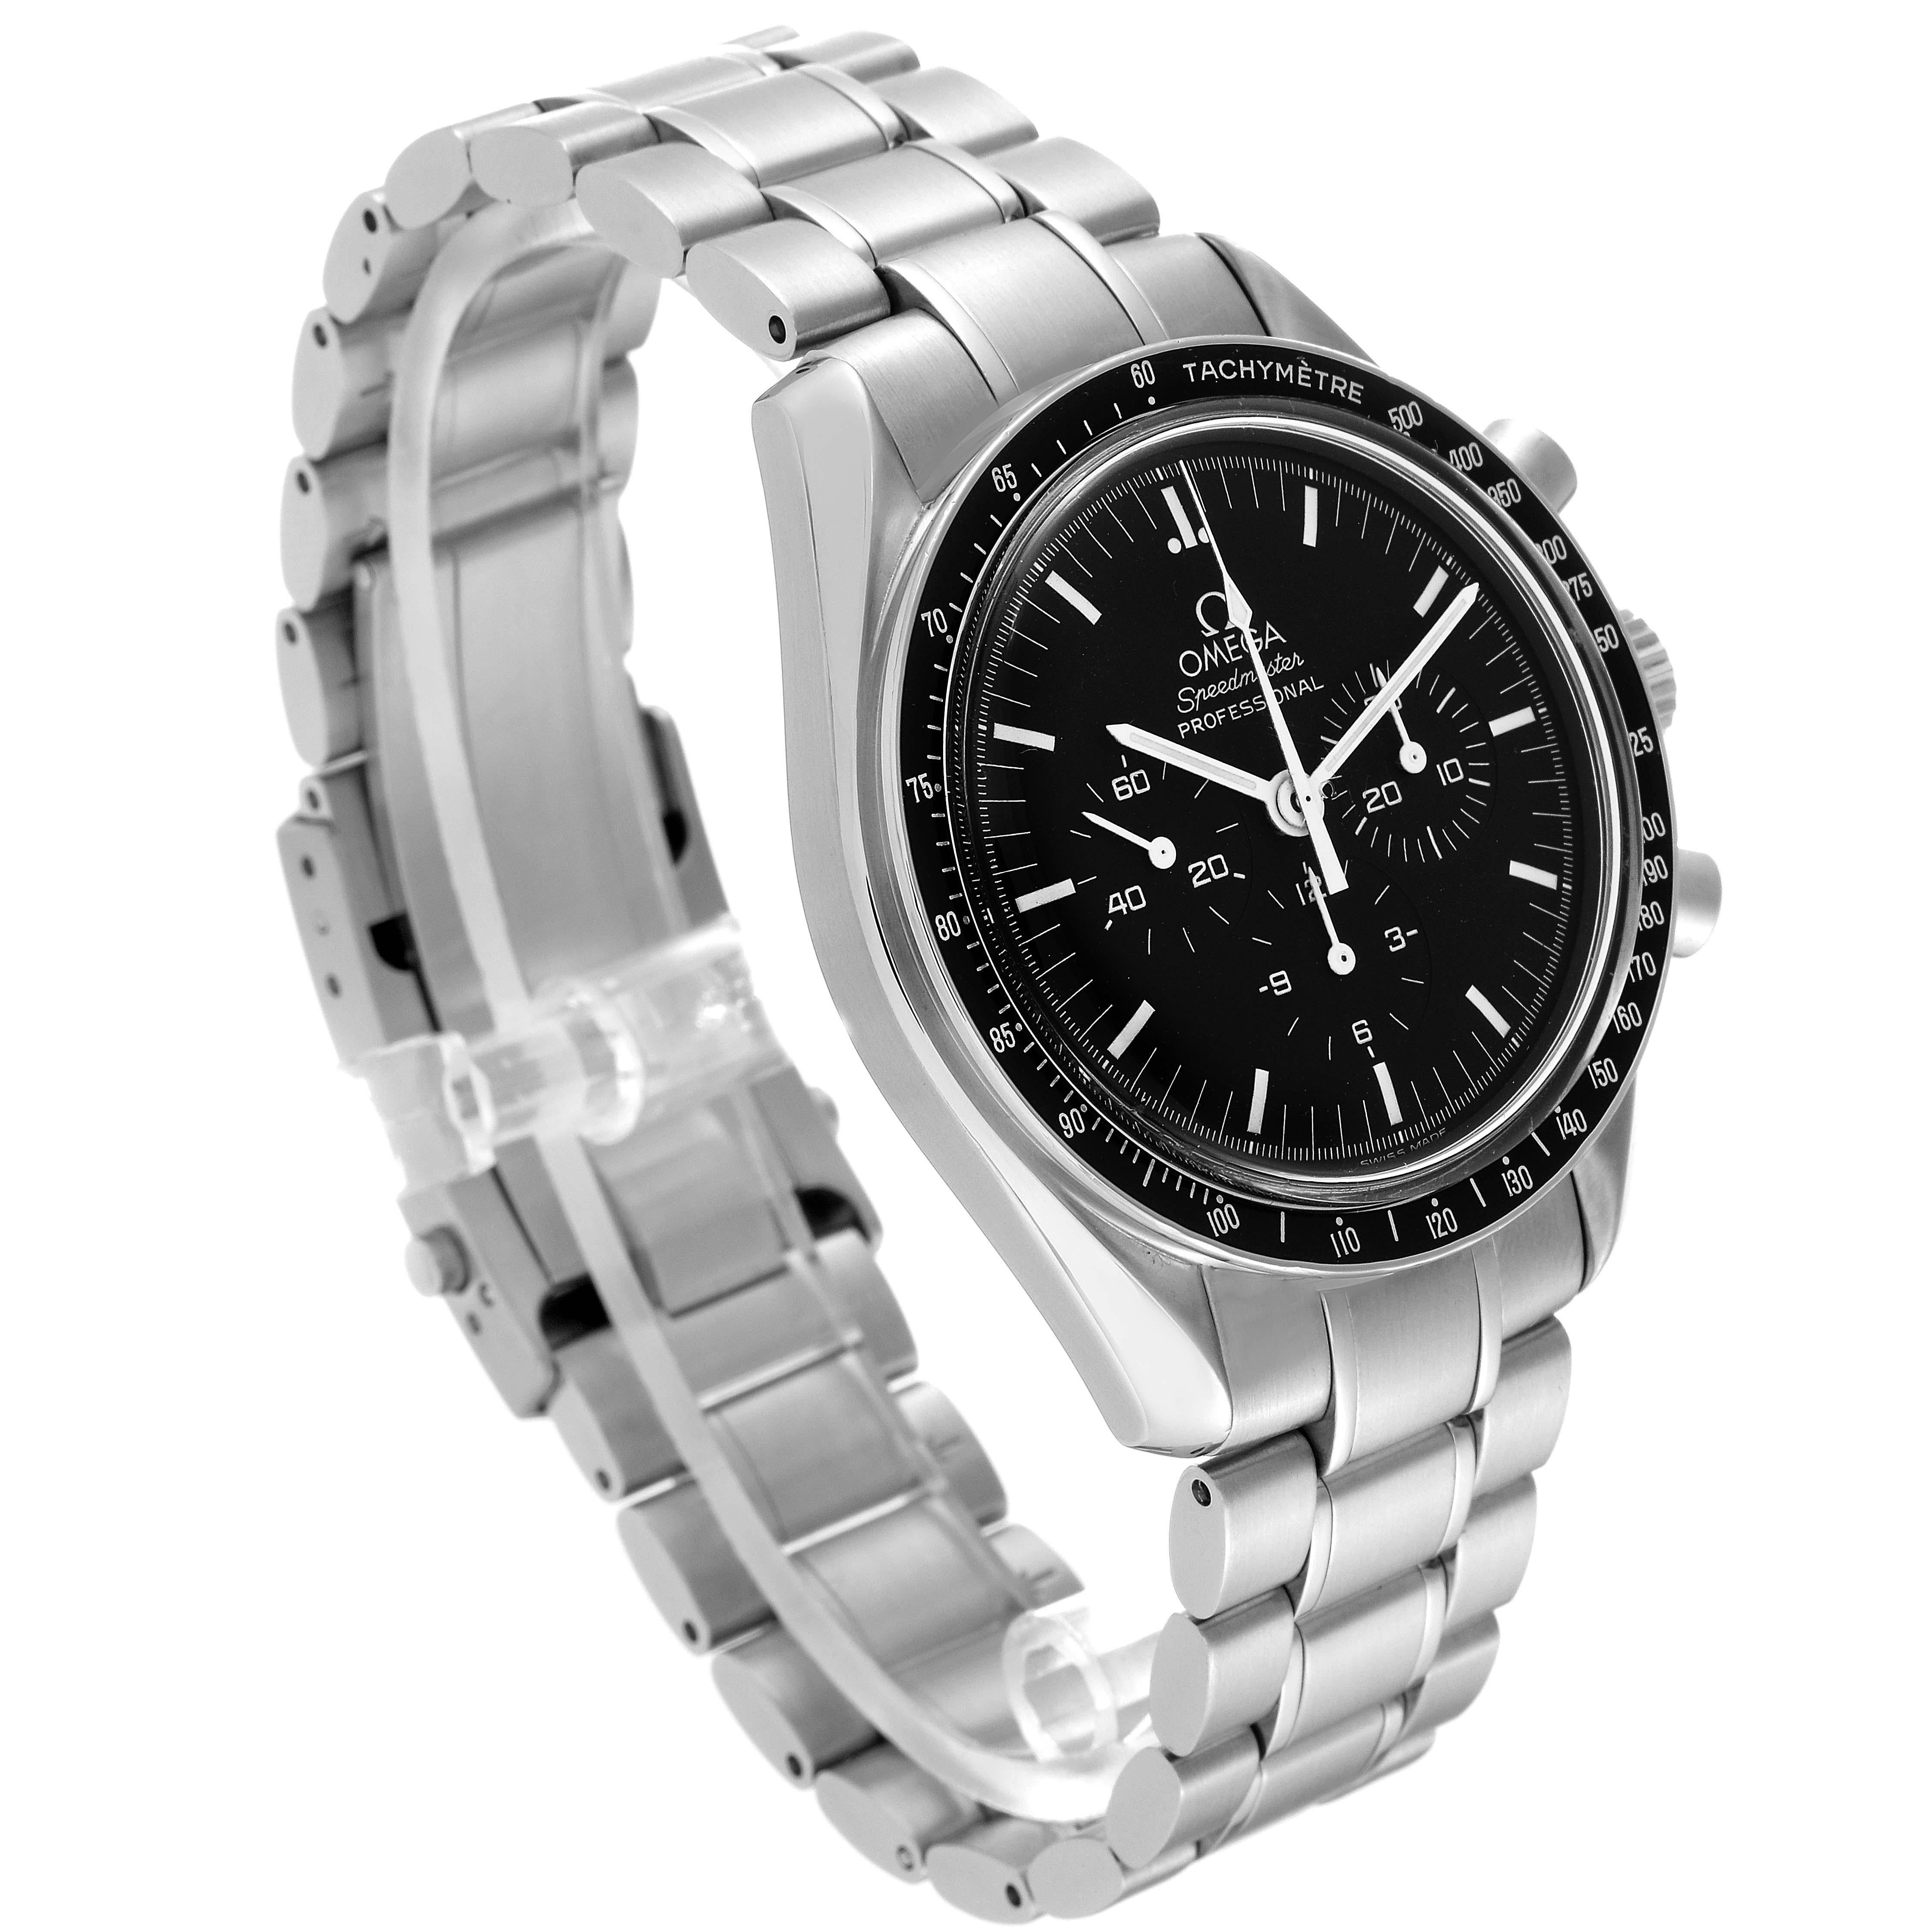 Omega Speedmaster Apollo XVII Limited Edition Mens Watch 3574.51.00 Box Card For Sale 6